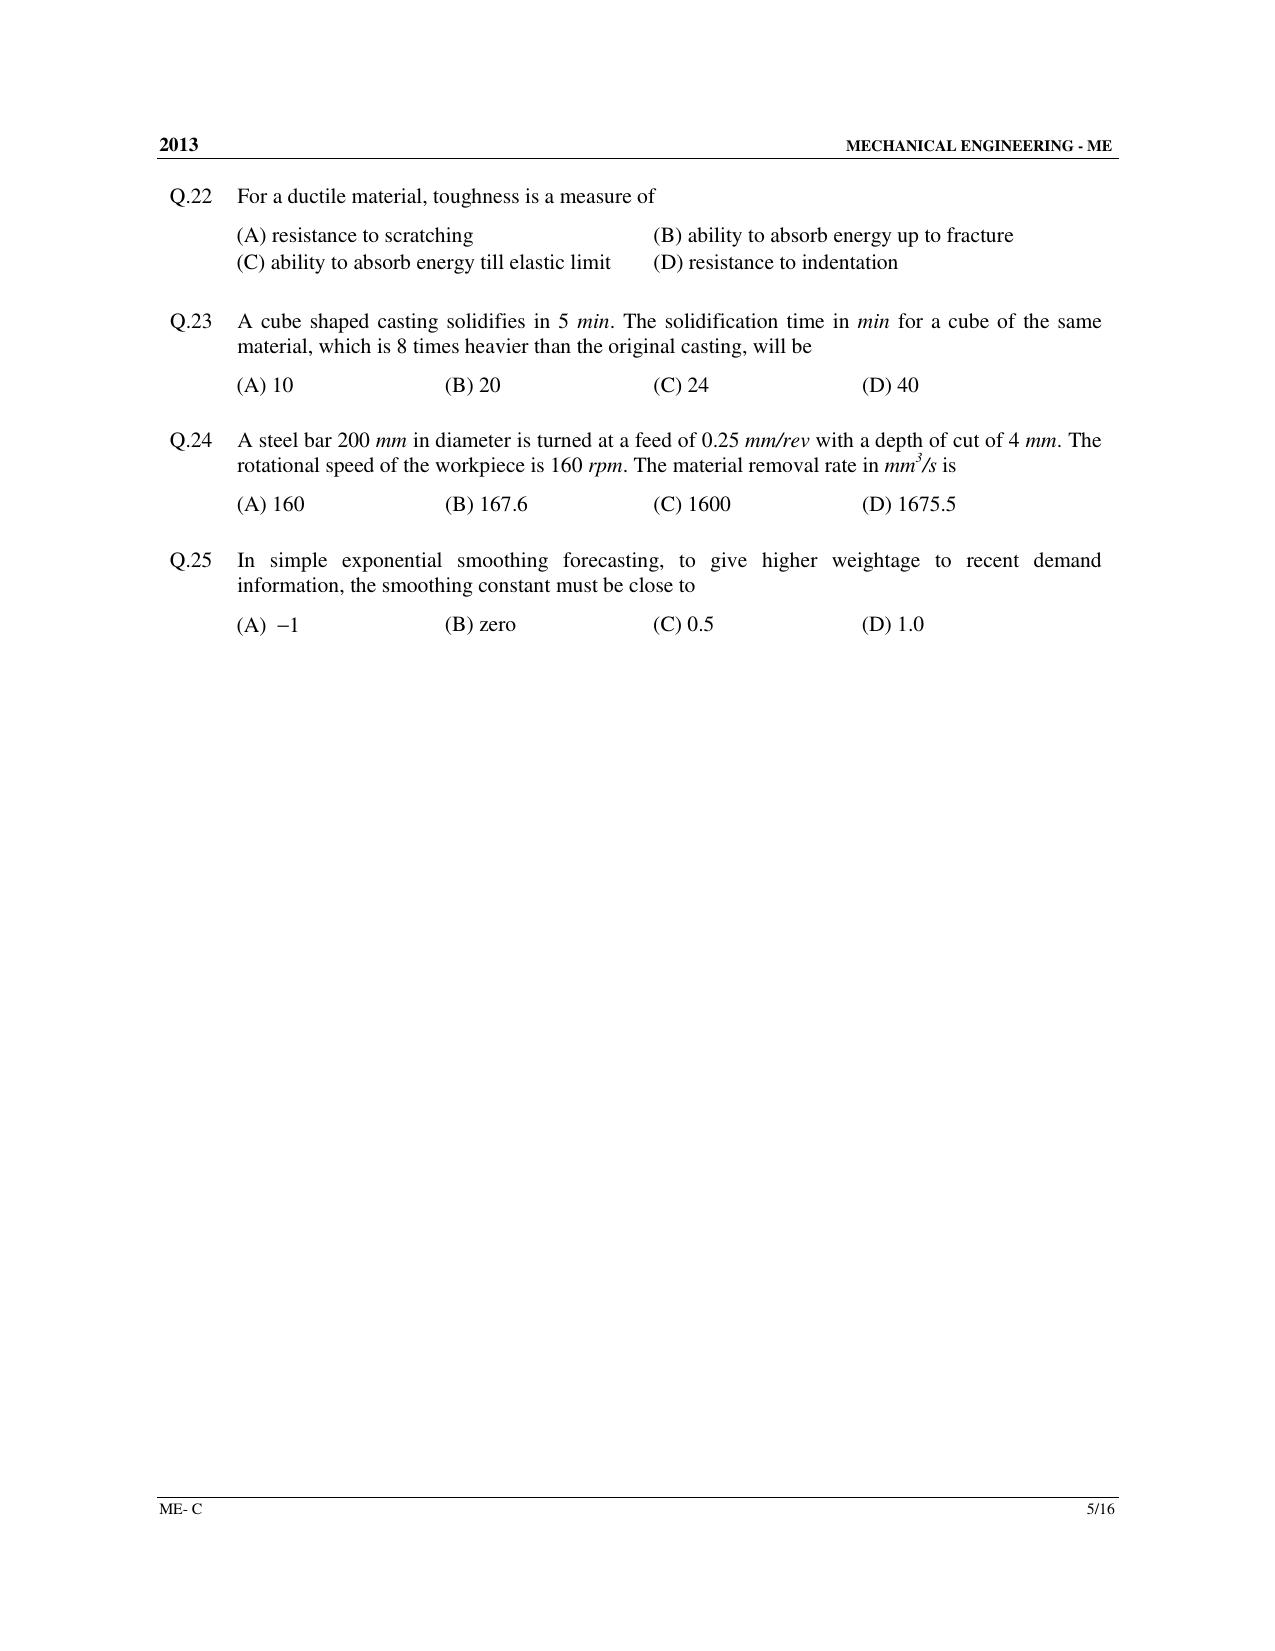 GATE 2013 Mechanical Engineering (ME) Question Paper with Answer Key - Page 34